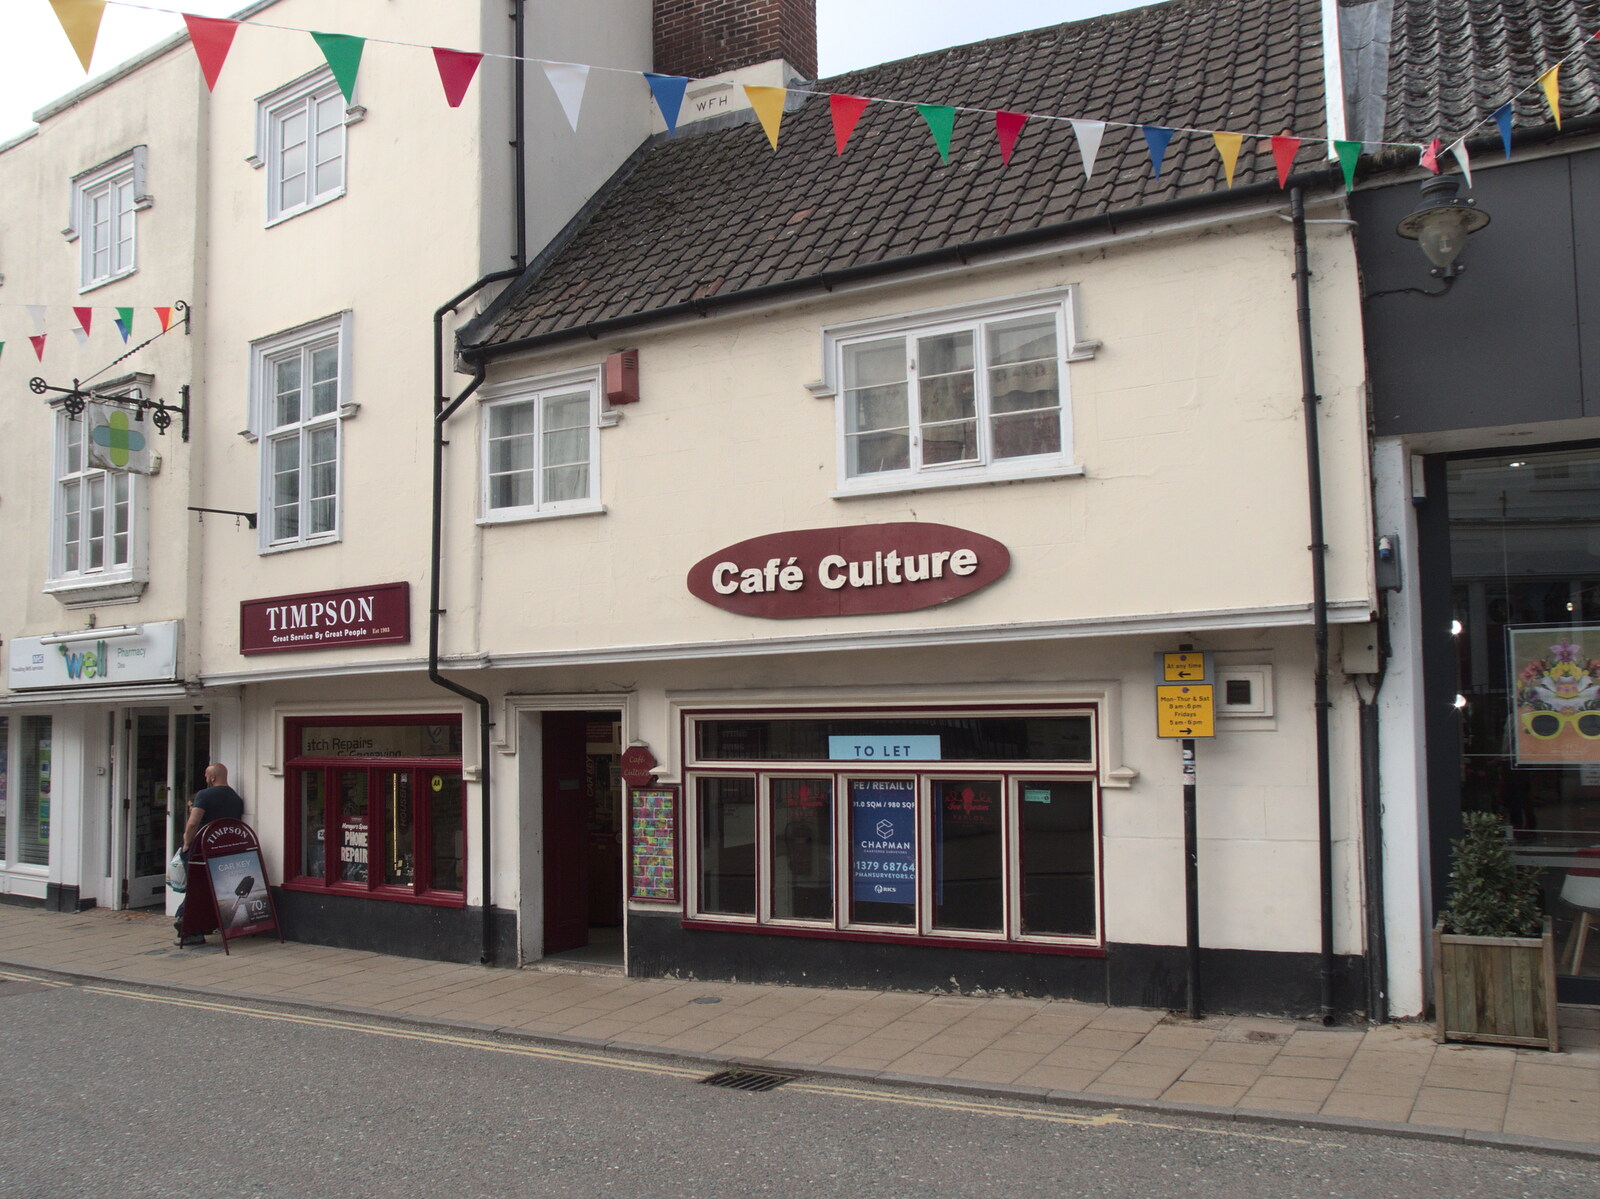 Café Culture closes after decades in Diss from A Few Hours at the Fair, Fair Green, Diss, Norfolk - 5th September 2021